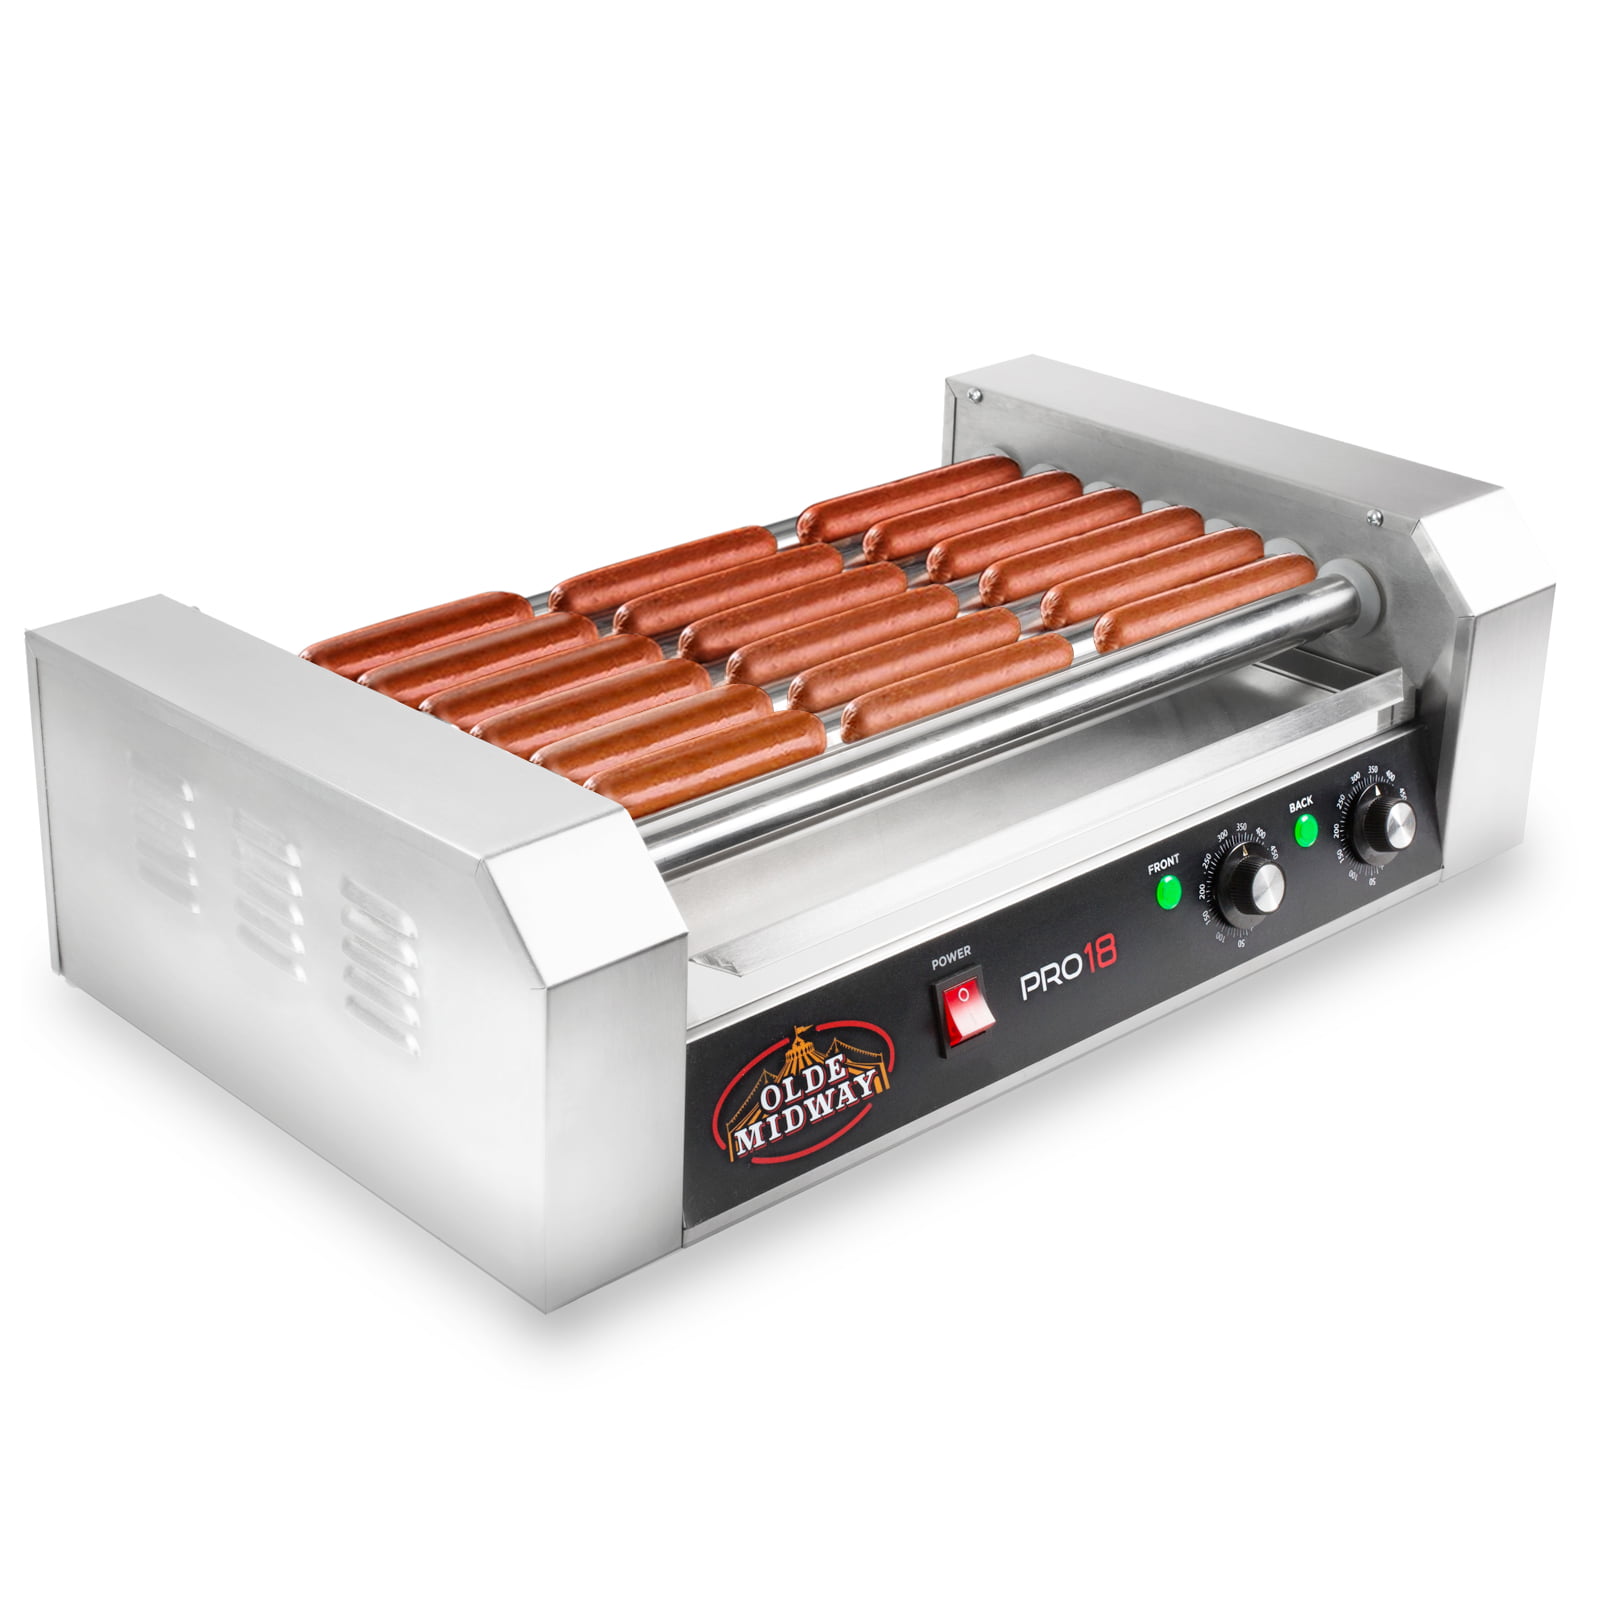 Olde Midway Electric 18 Hot Dog 7 Roller Grill Cooker Machine 900-Watt With Cove 